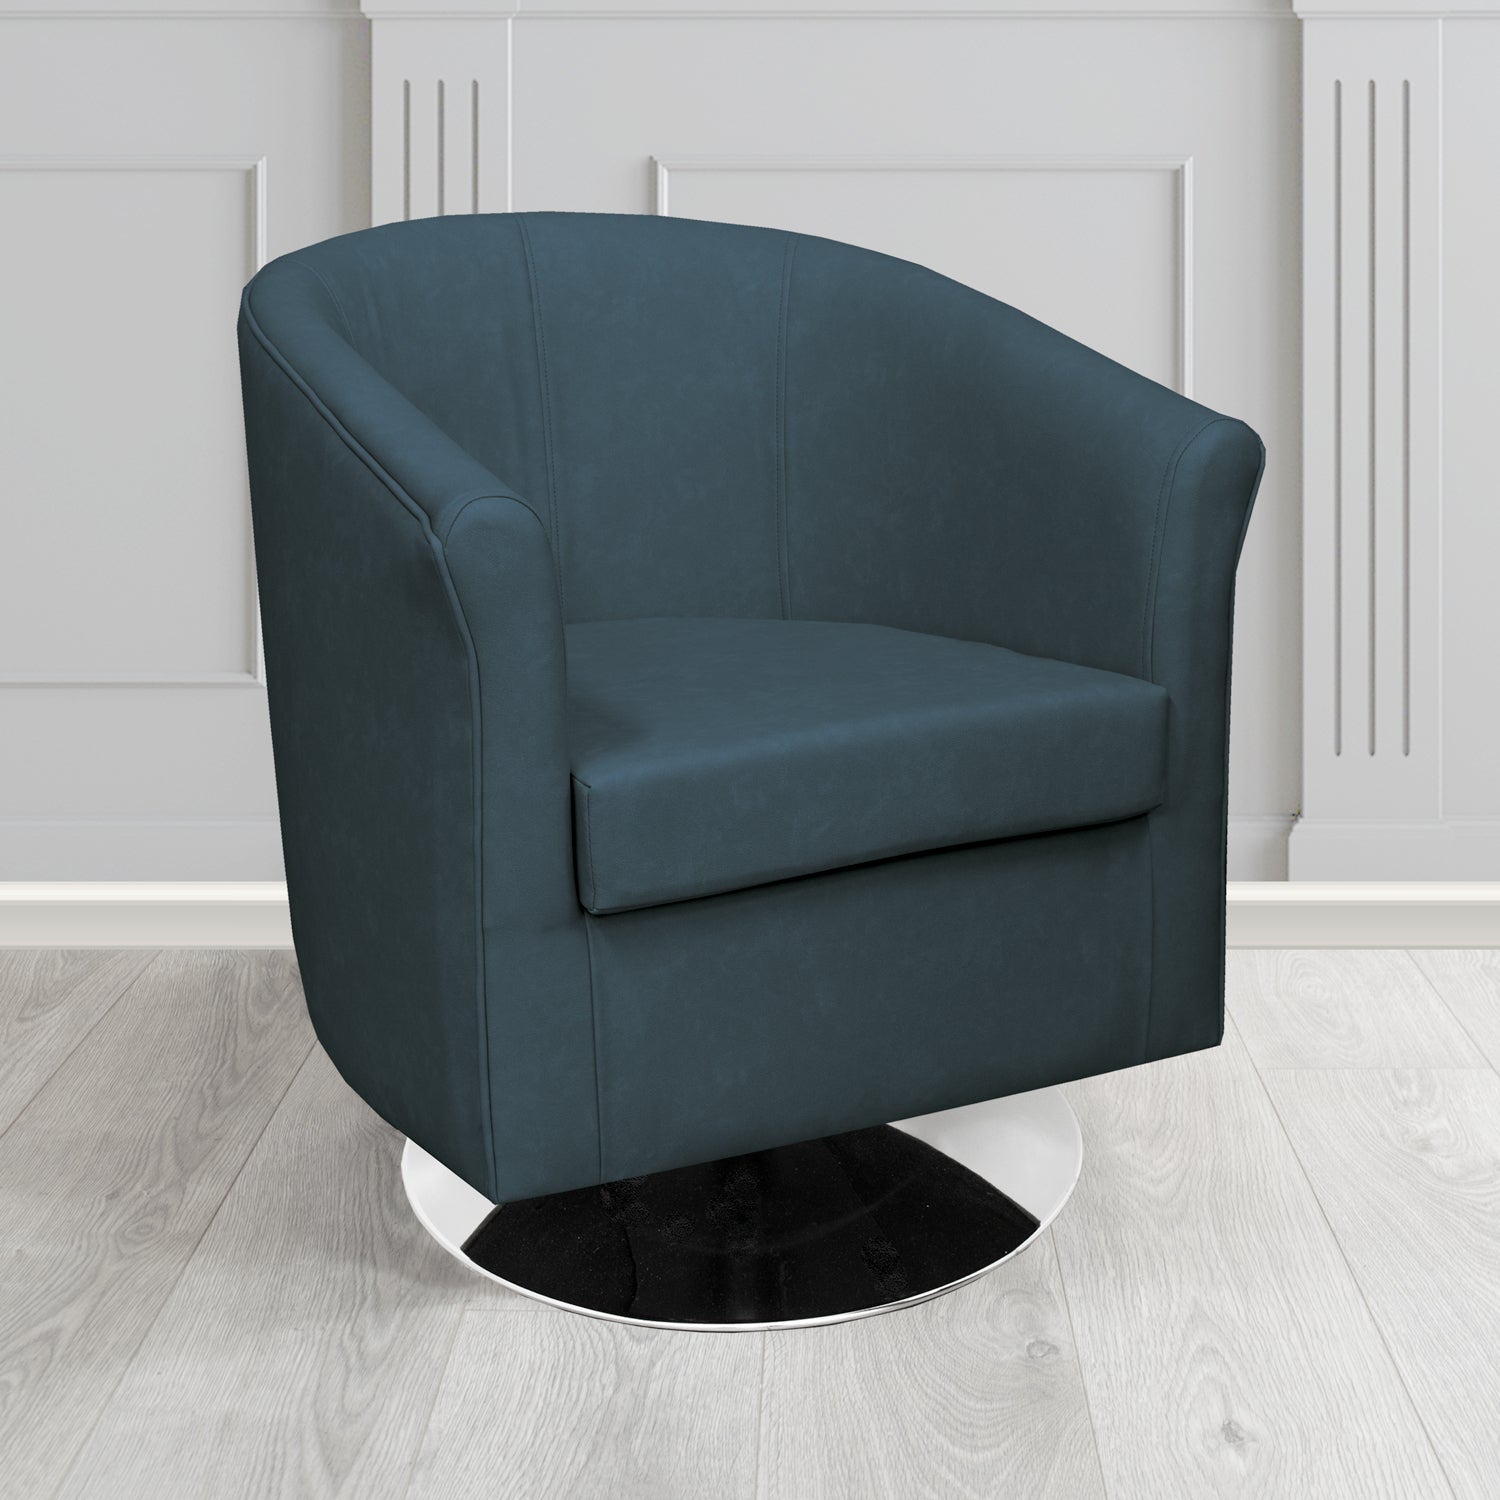 Tuscany Swivel Tub Chair in Infiniti Sapphire INF1855 Antimicrobial Crib 5 Faux Leather - The Tub Chair Shop